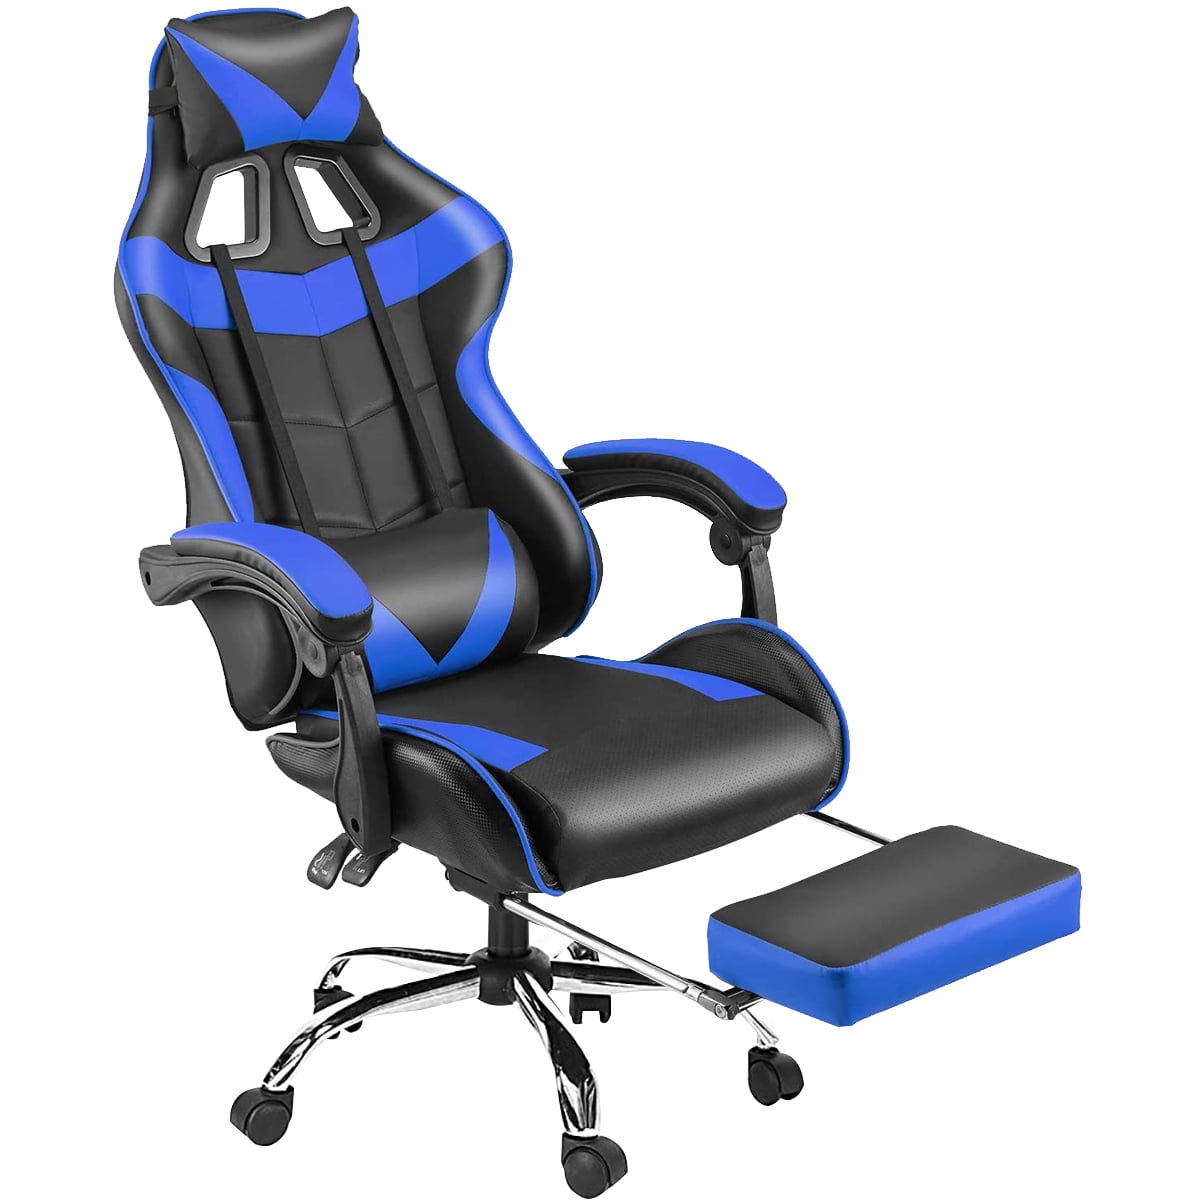 Black Gaming Chair Carbon Fiber Leather Rocking High Back Racing Style Computer Office Chair Ergonomic Desk Chair Swivel Bucket Gaming Chair with Lumbar Support and Headrest 